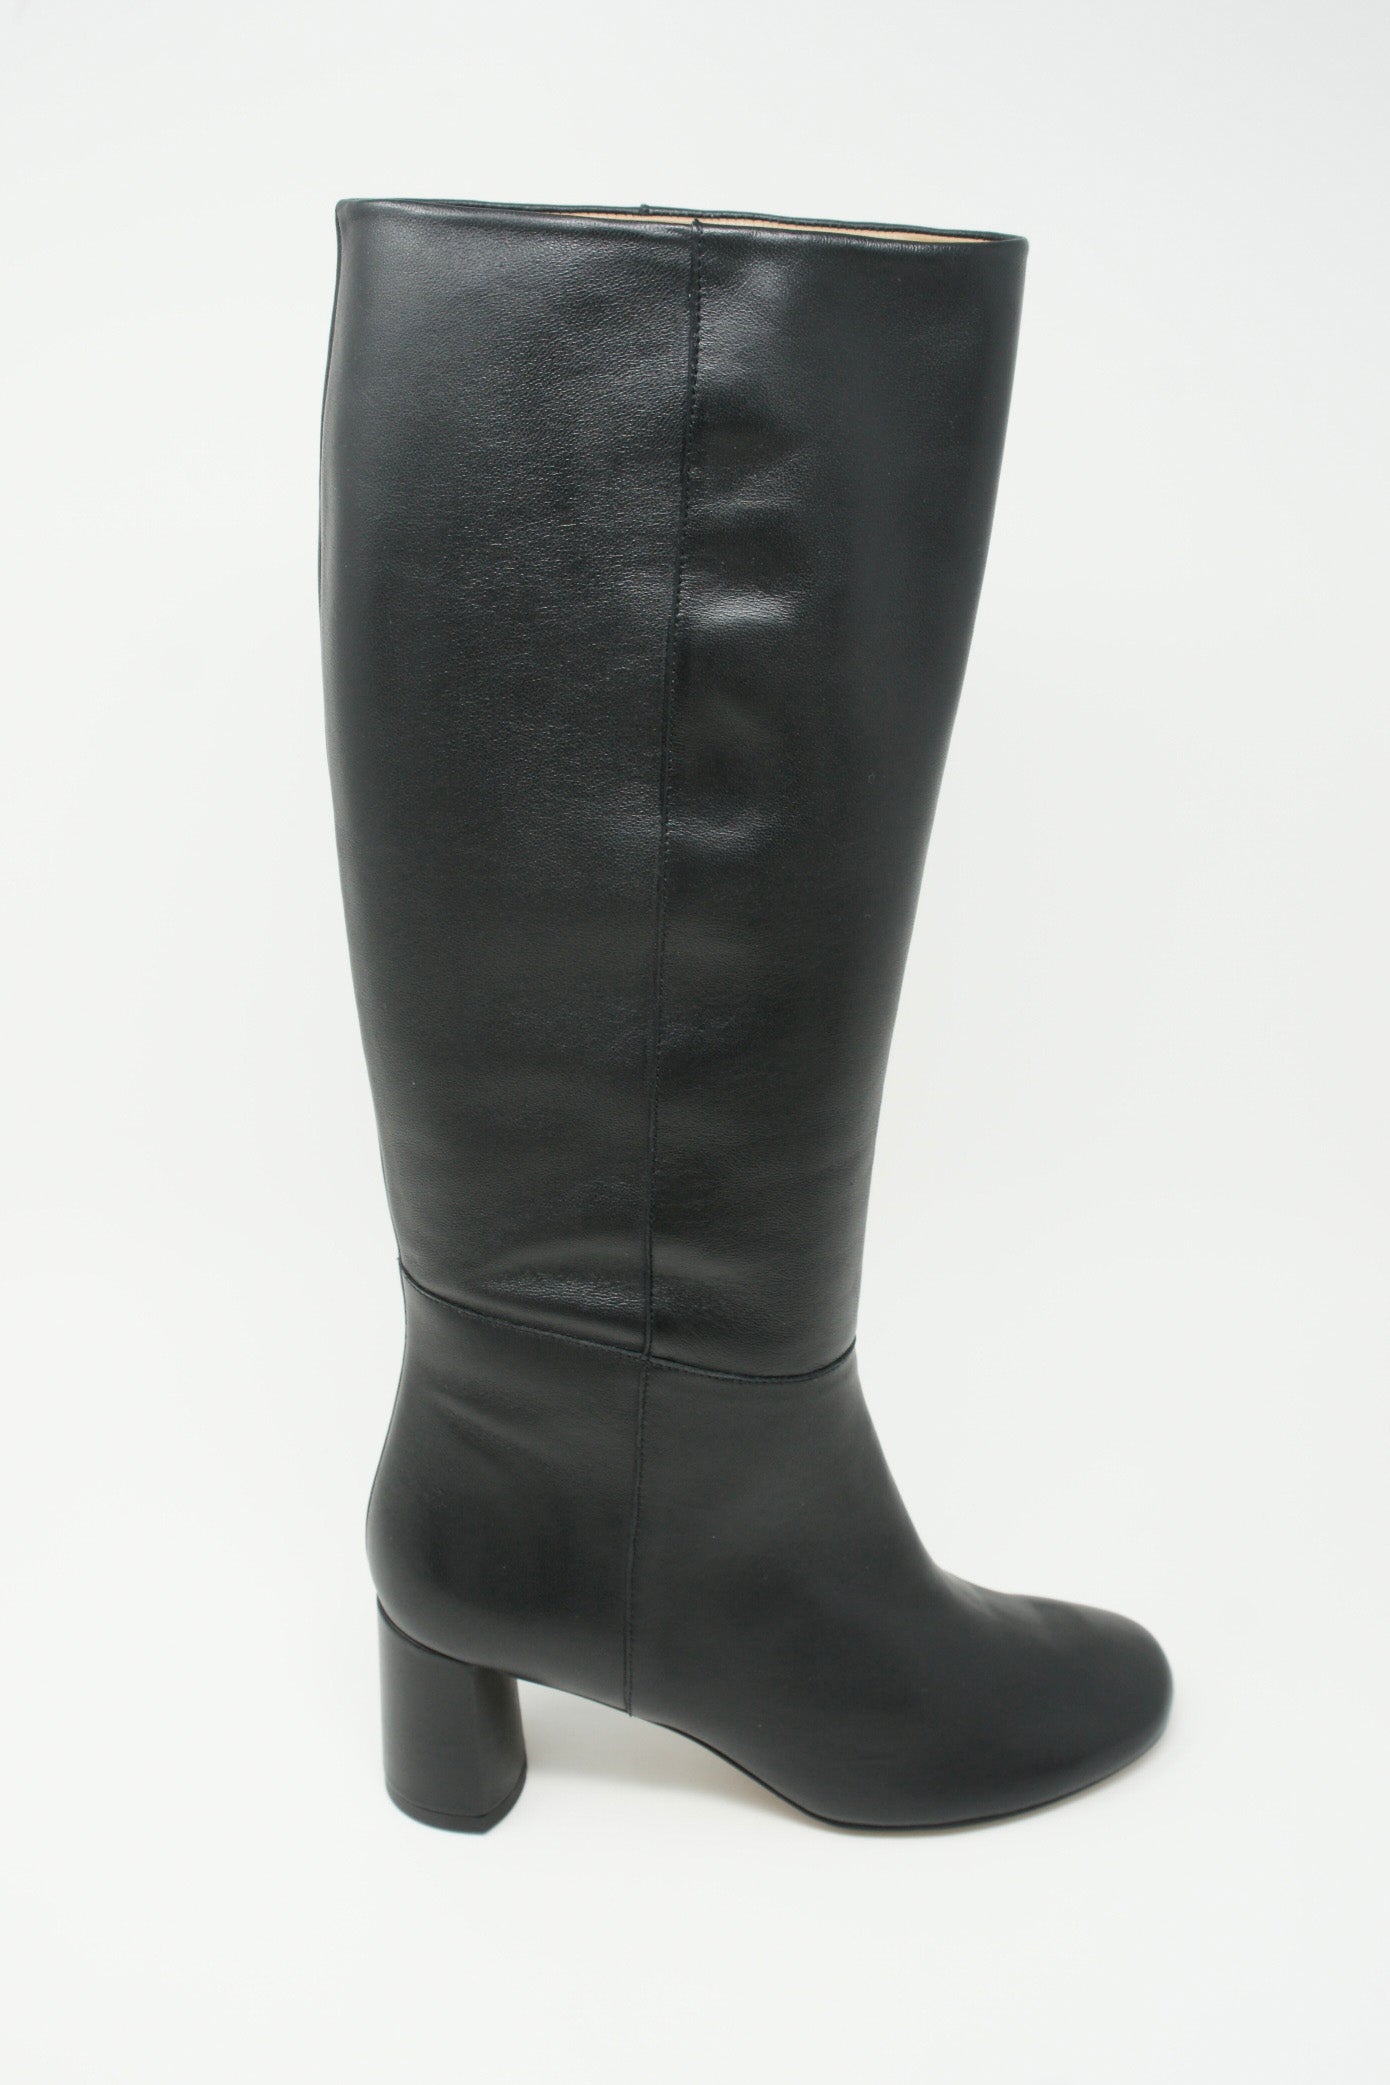 A woman's LOQ Donna Boot in Black leather knee high pull-on boots on a white background.